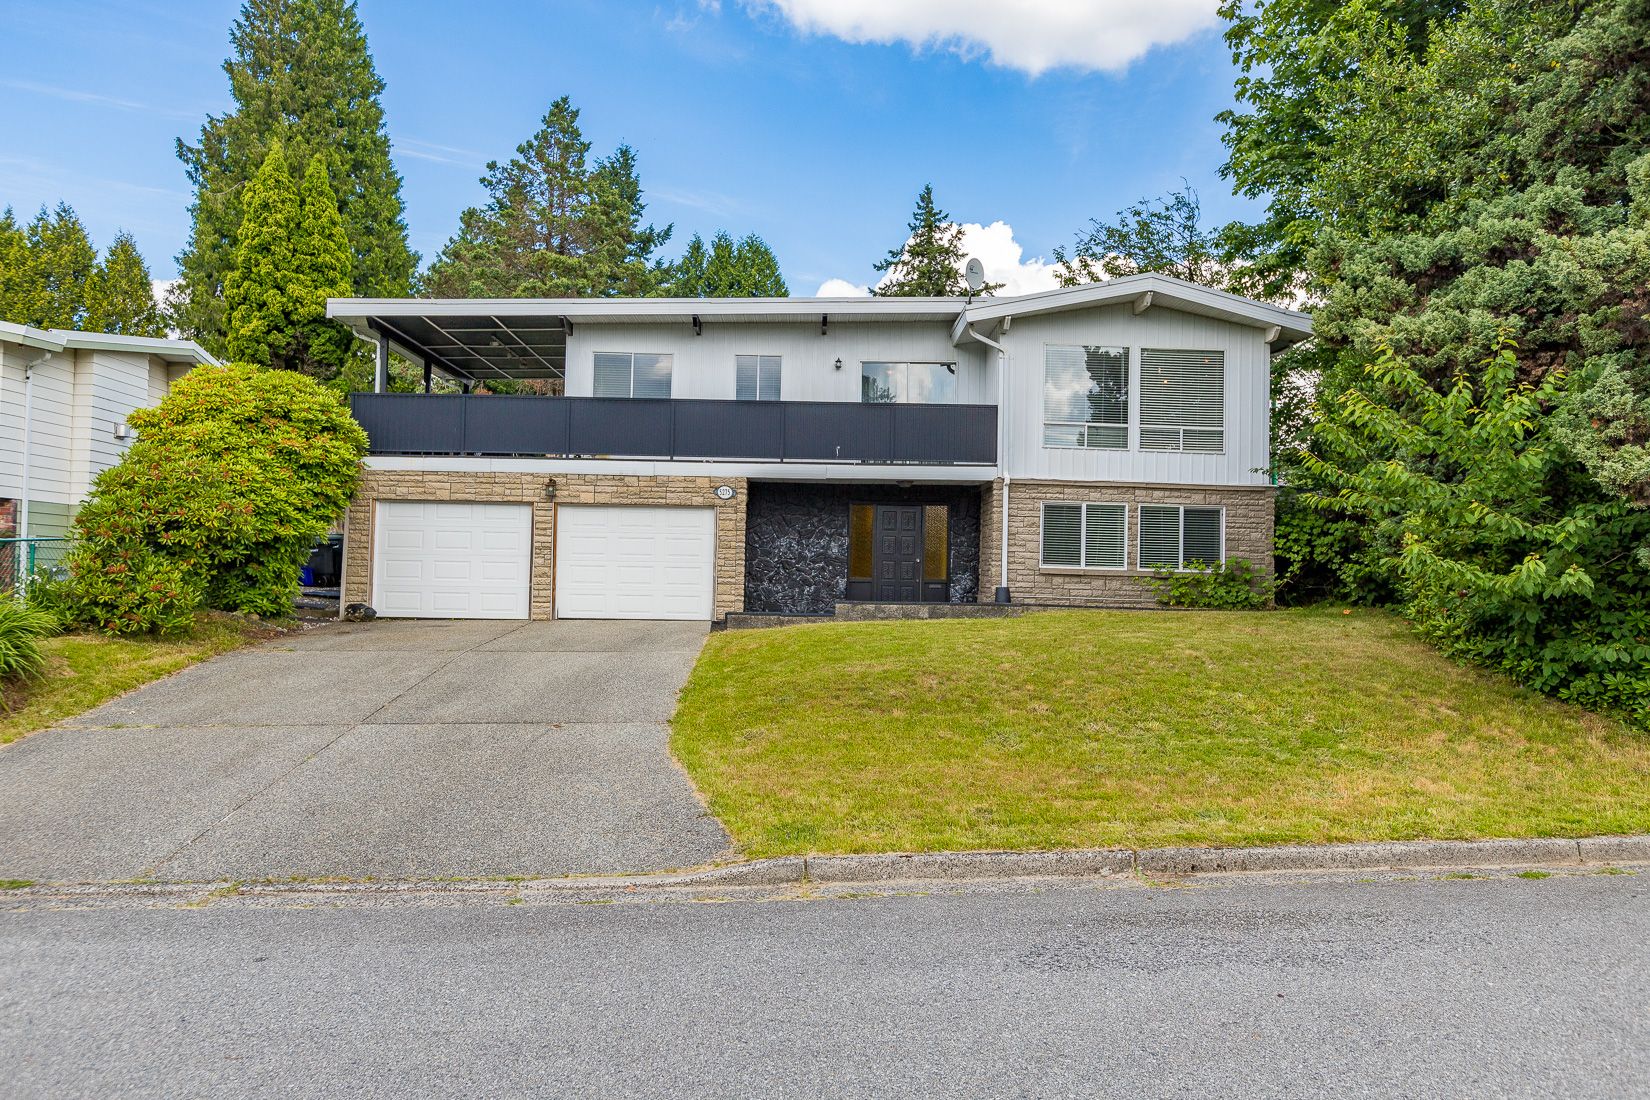 Main Photo: SPRINGDALE CT in BURNABY: Parkcrest House for sale (Burnaby North)  : MLS®# R2591718